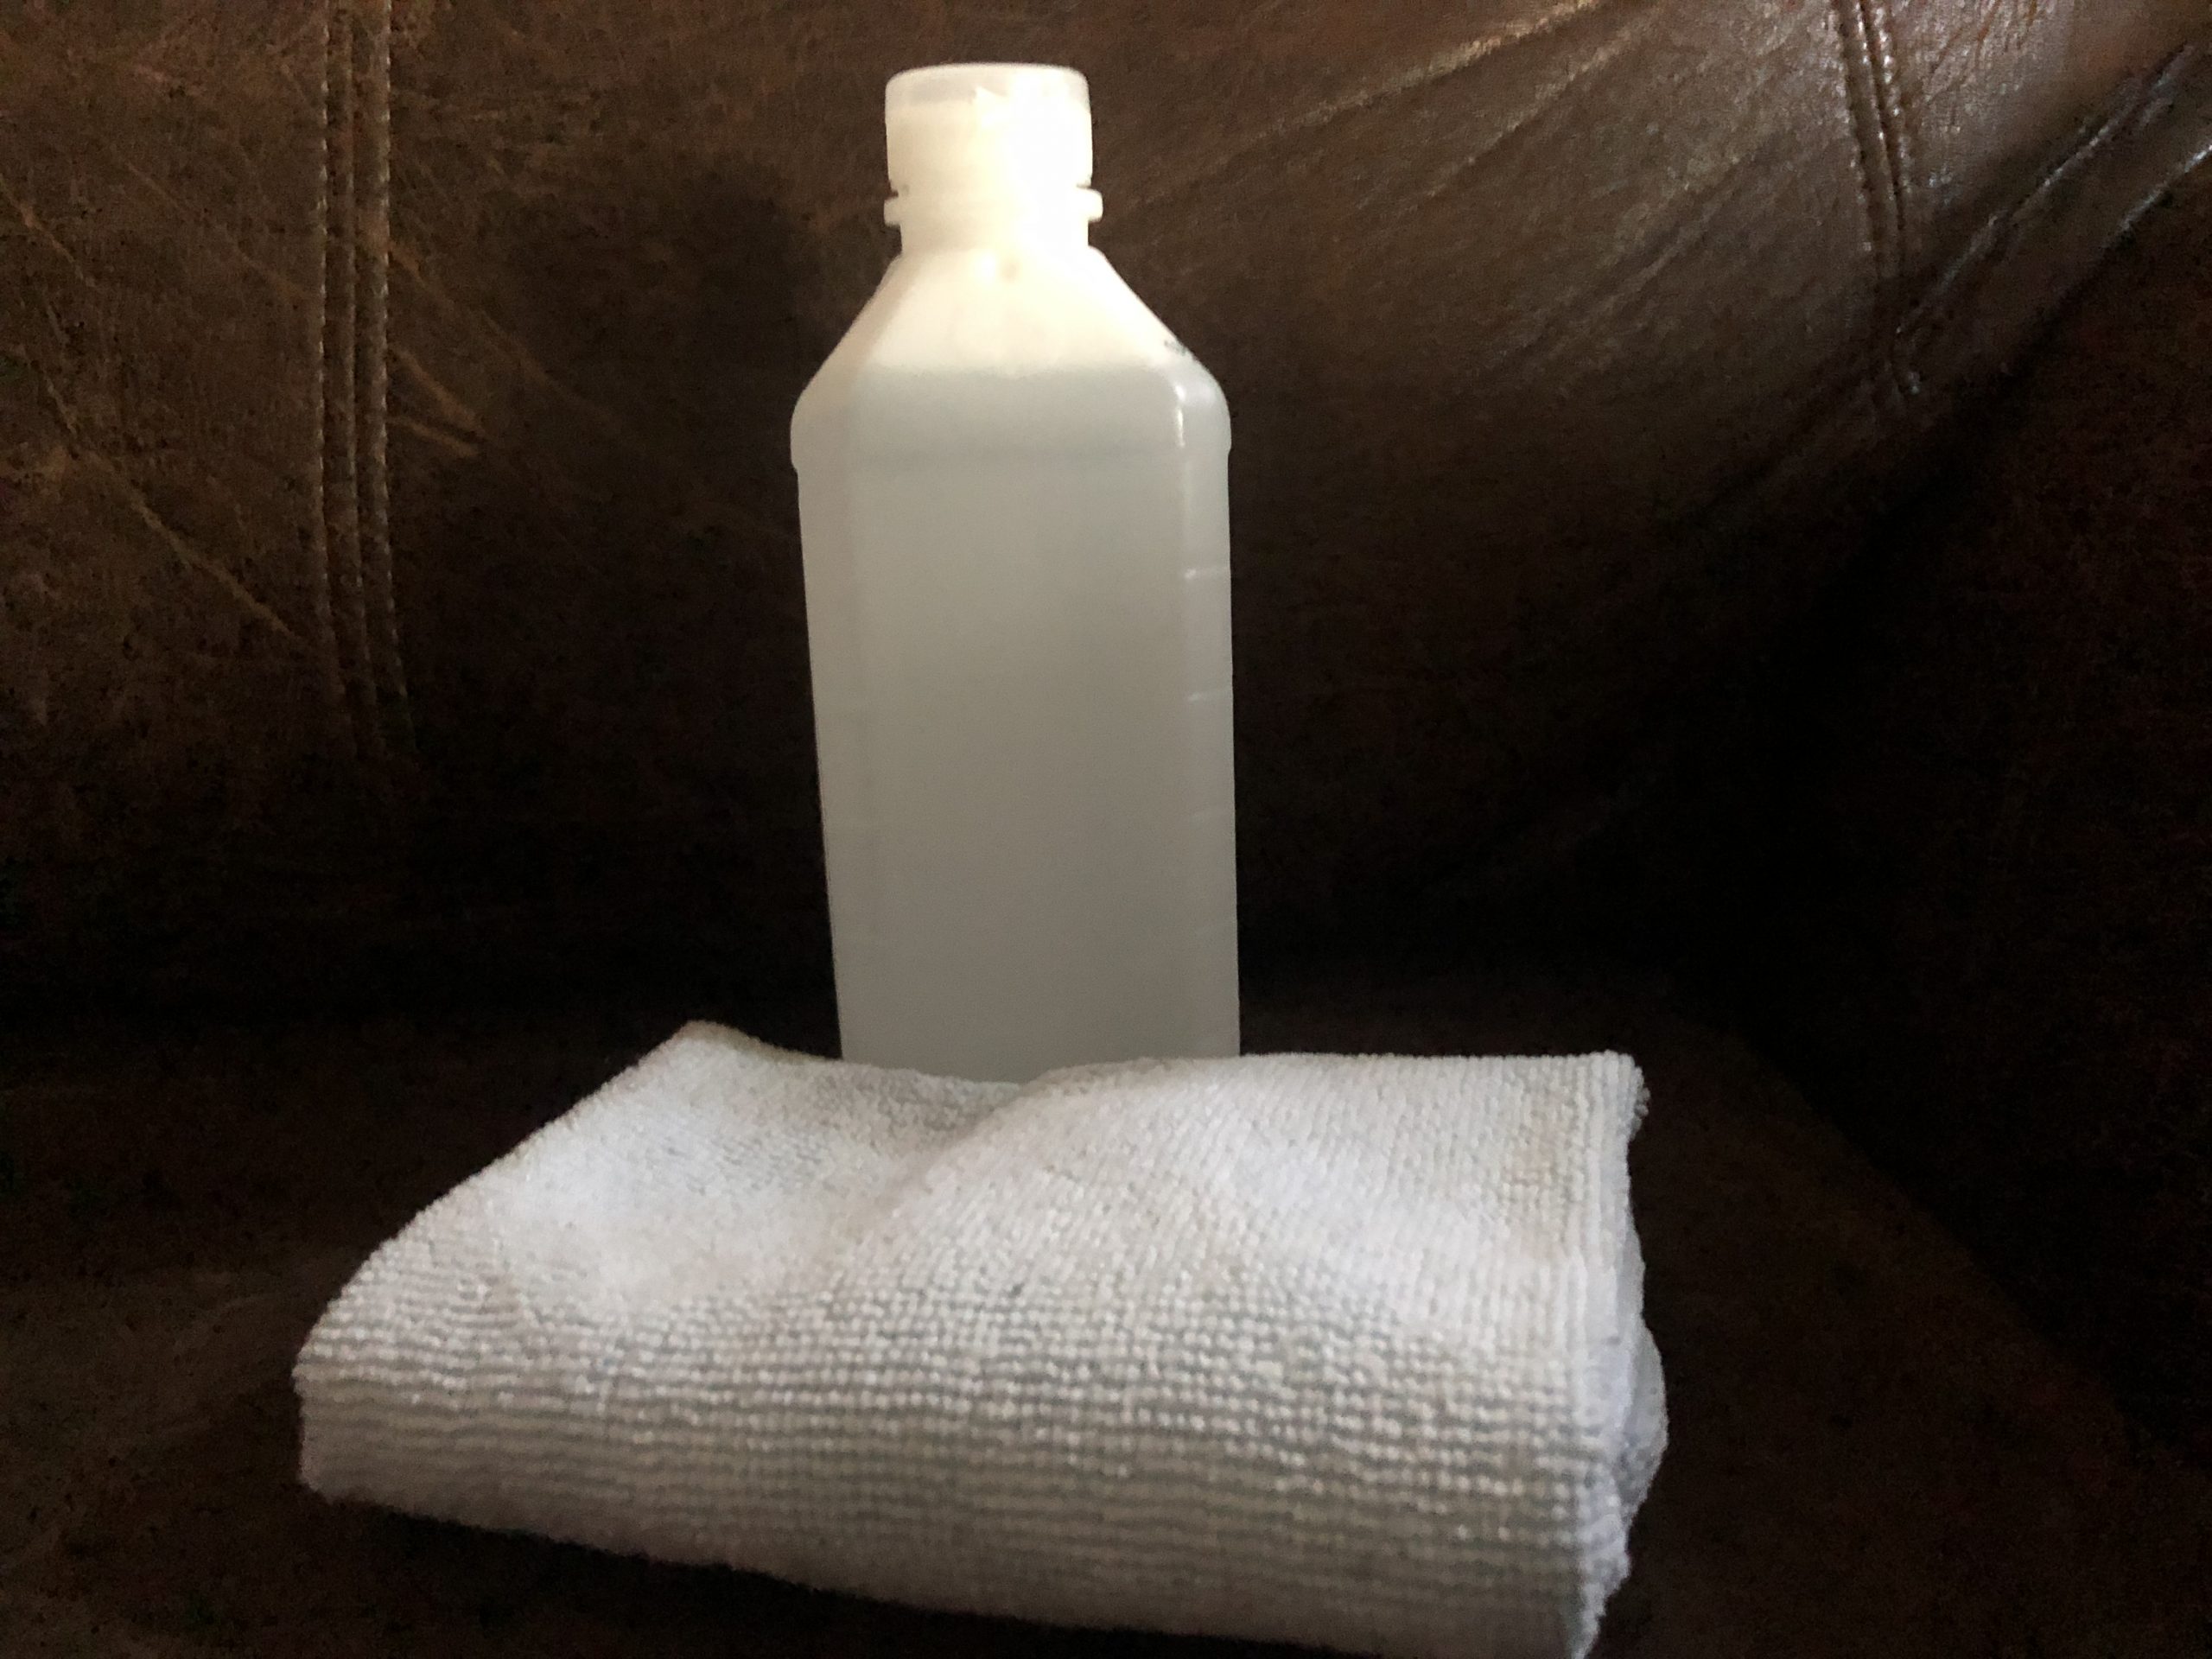 70% Isopropyl Alcohol and a microfiber towel are all that is needed to sanitize your vehicle 